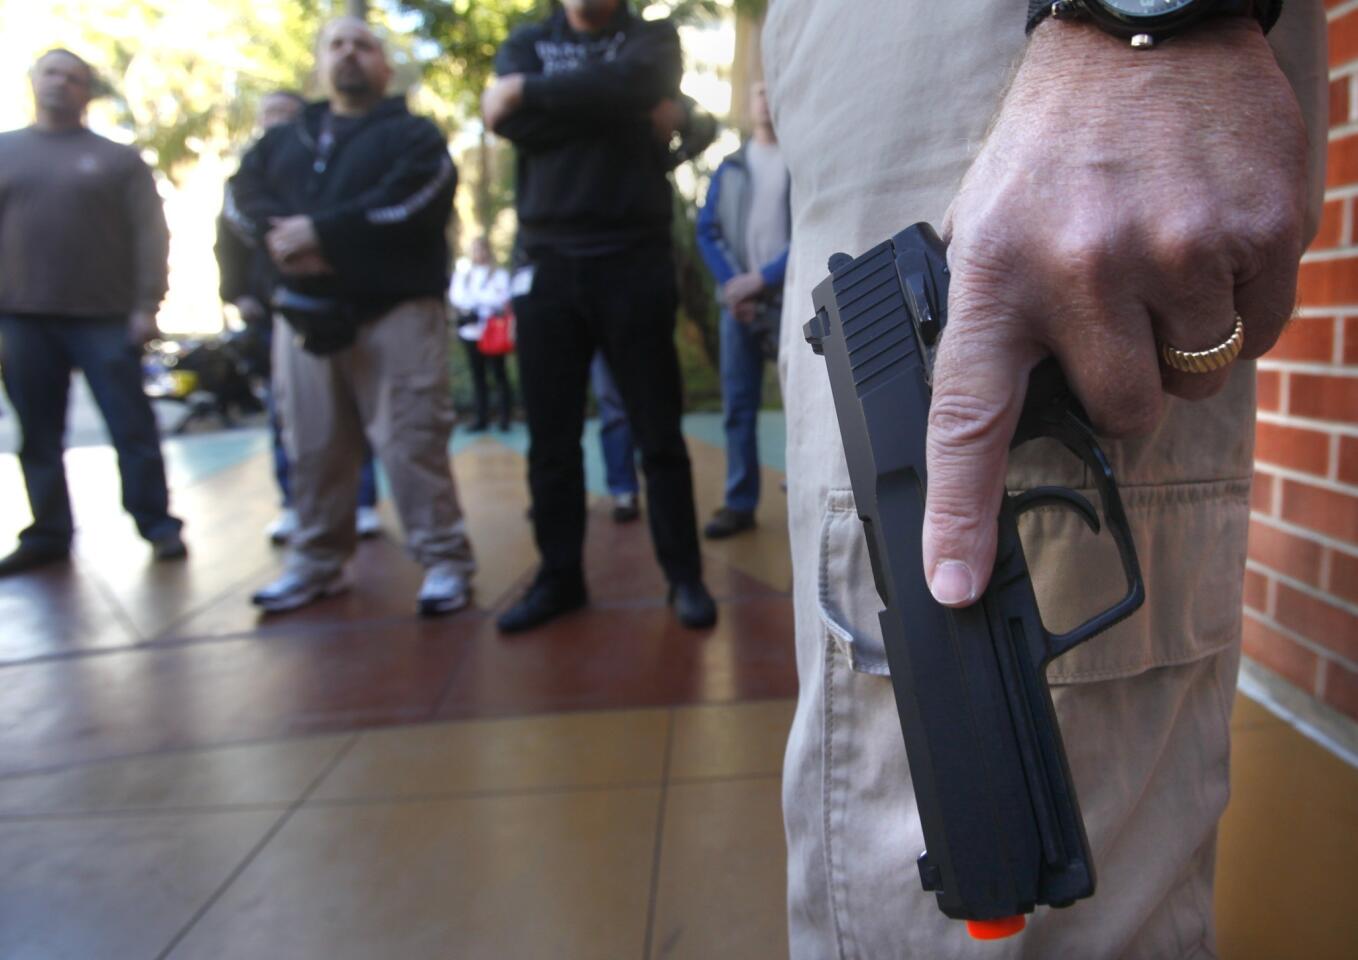 Instructor Bret Bandick holds an airsoft gun as he acts as a shooter at the Olmeca Residence Hall at San Diego State while police officers and school officials participate in the training exercise. The two-day Active Shooter Response Training aims to teach college and school officials and others what to do in the event of a mass shooting.